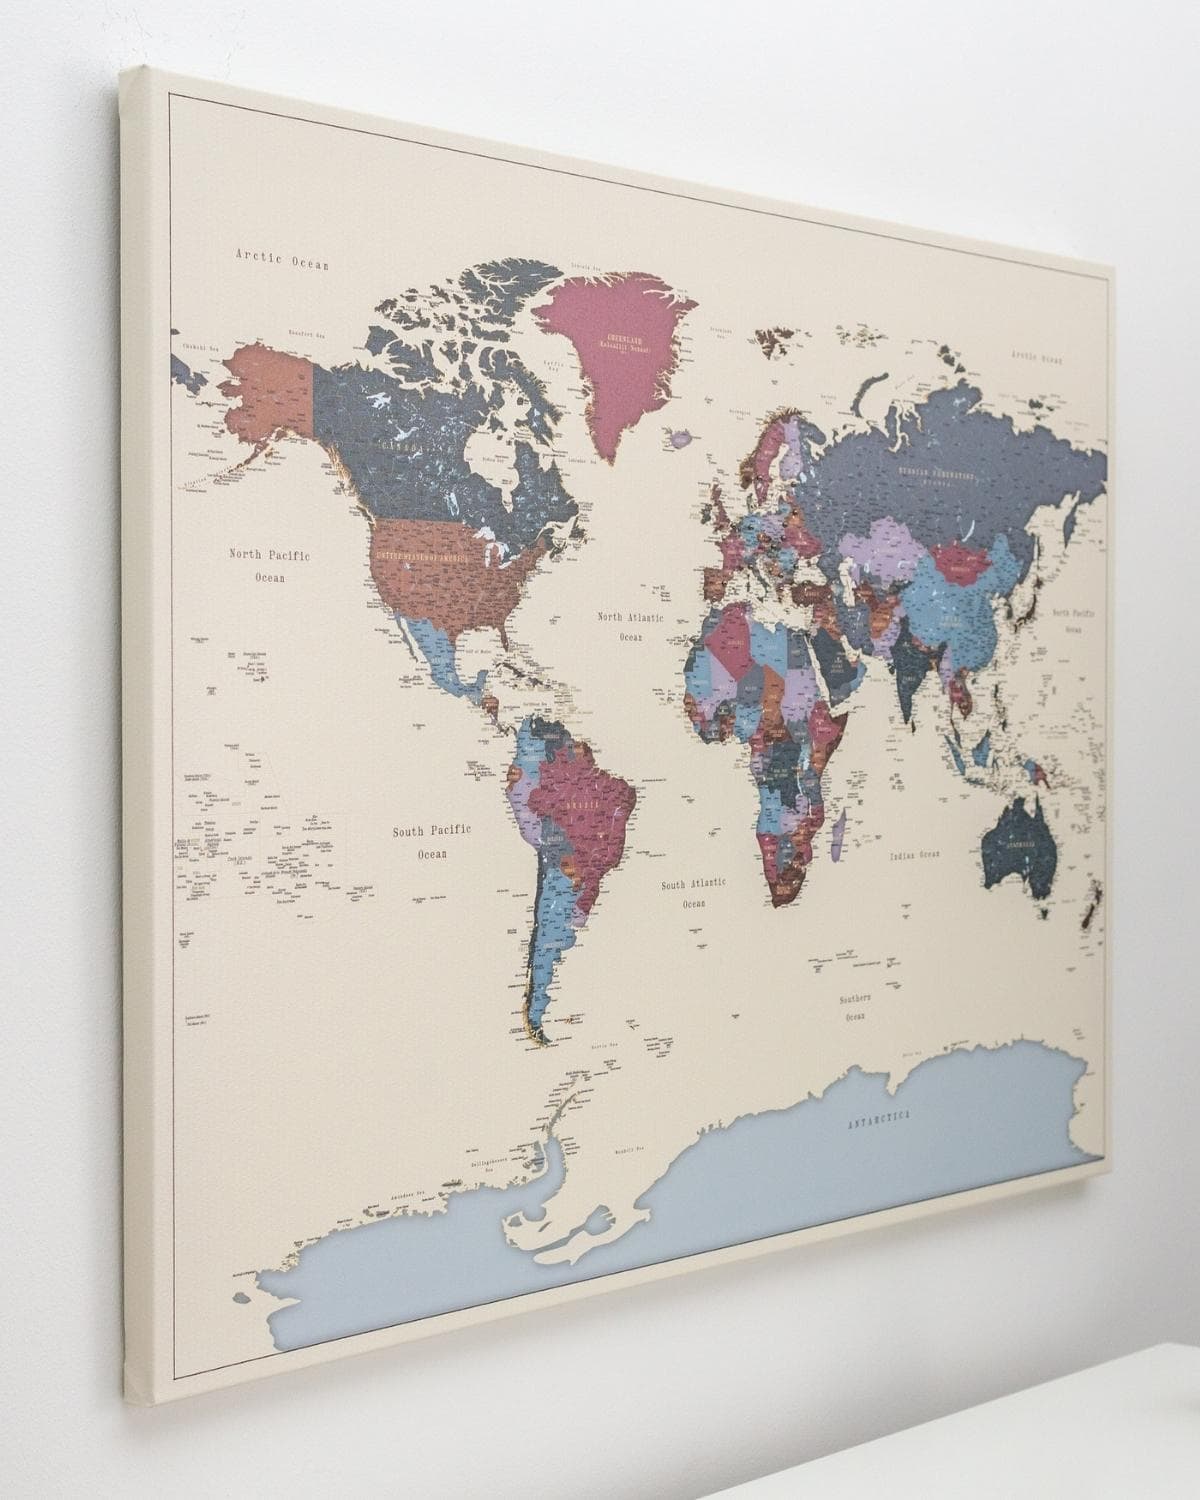 5 Tips That Will Help You Choose a Cork Board World Map